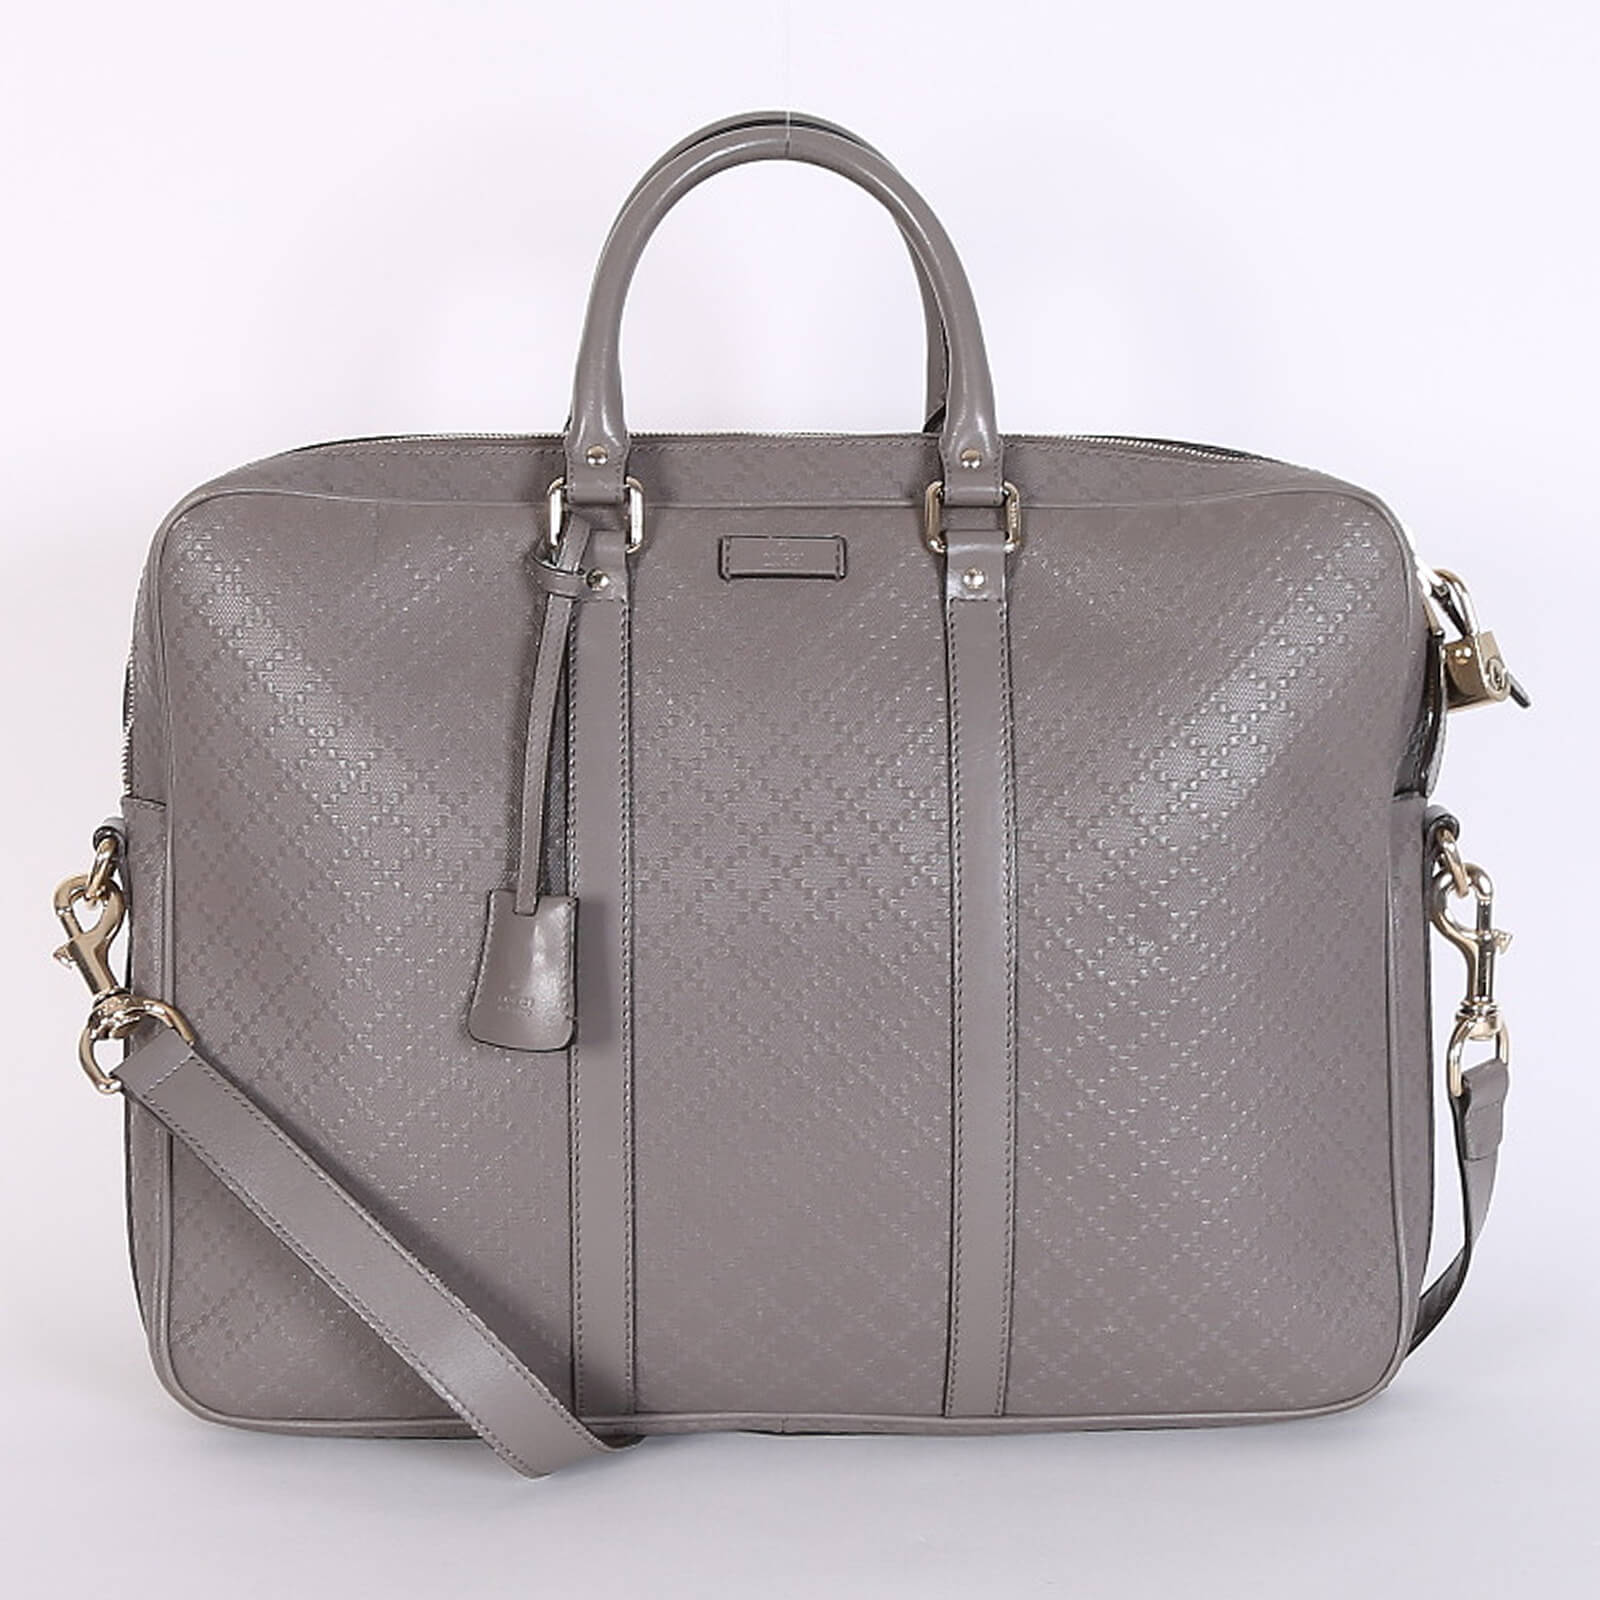 Andragende mobil Afgørelse Gucci - Diamante Leather Briefcase Grey | www.luxurybags.eu